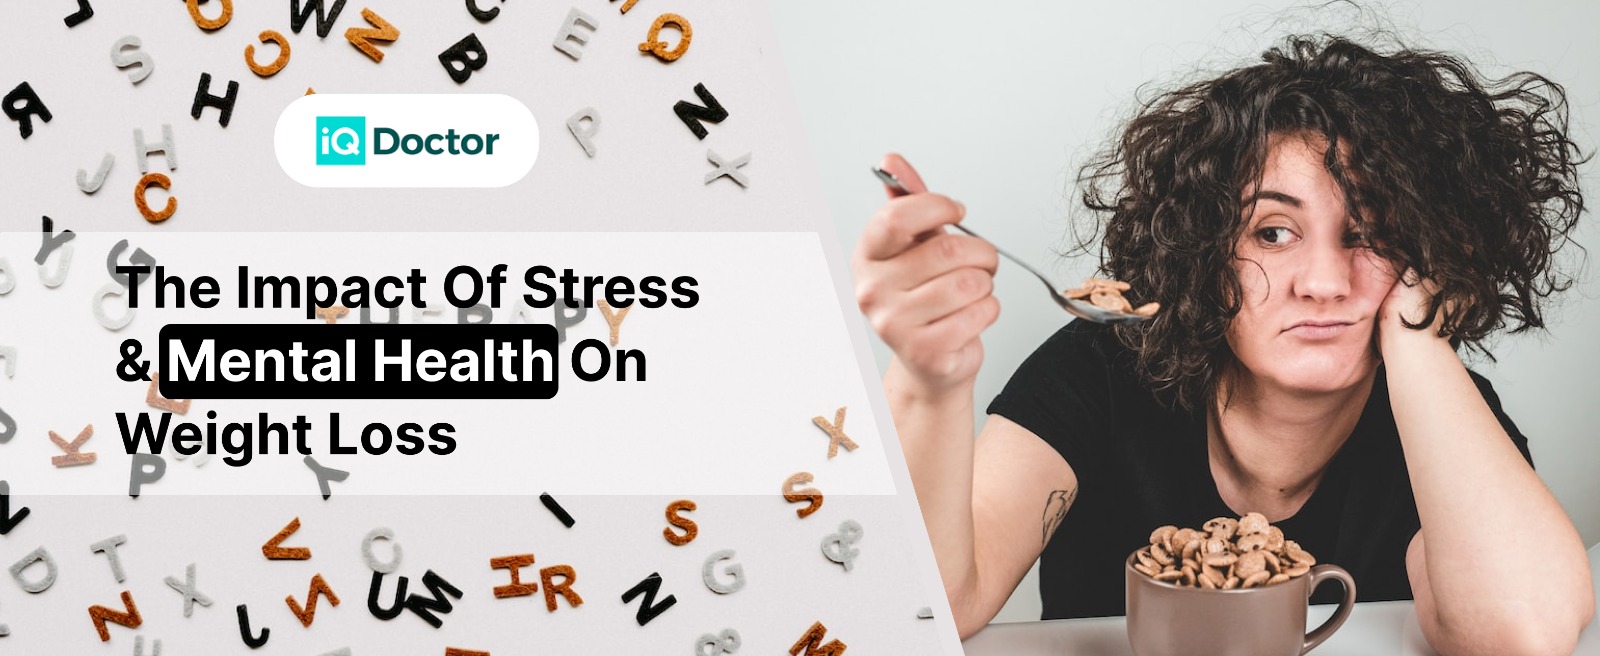 The impact of stress and mental health on weight loss